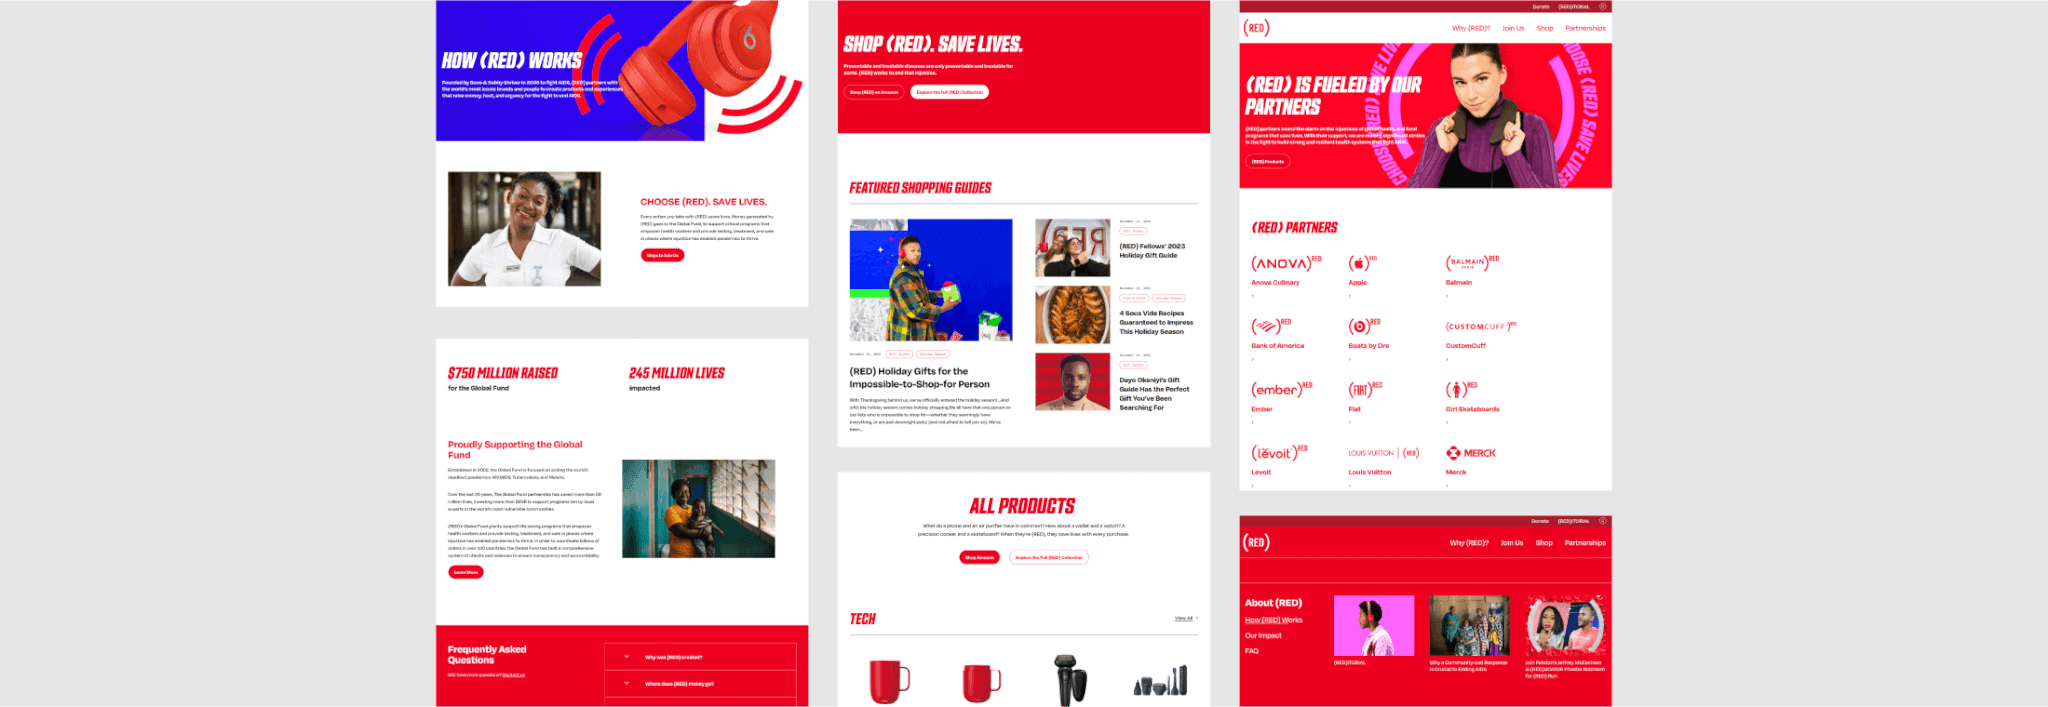 RED.org screens